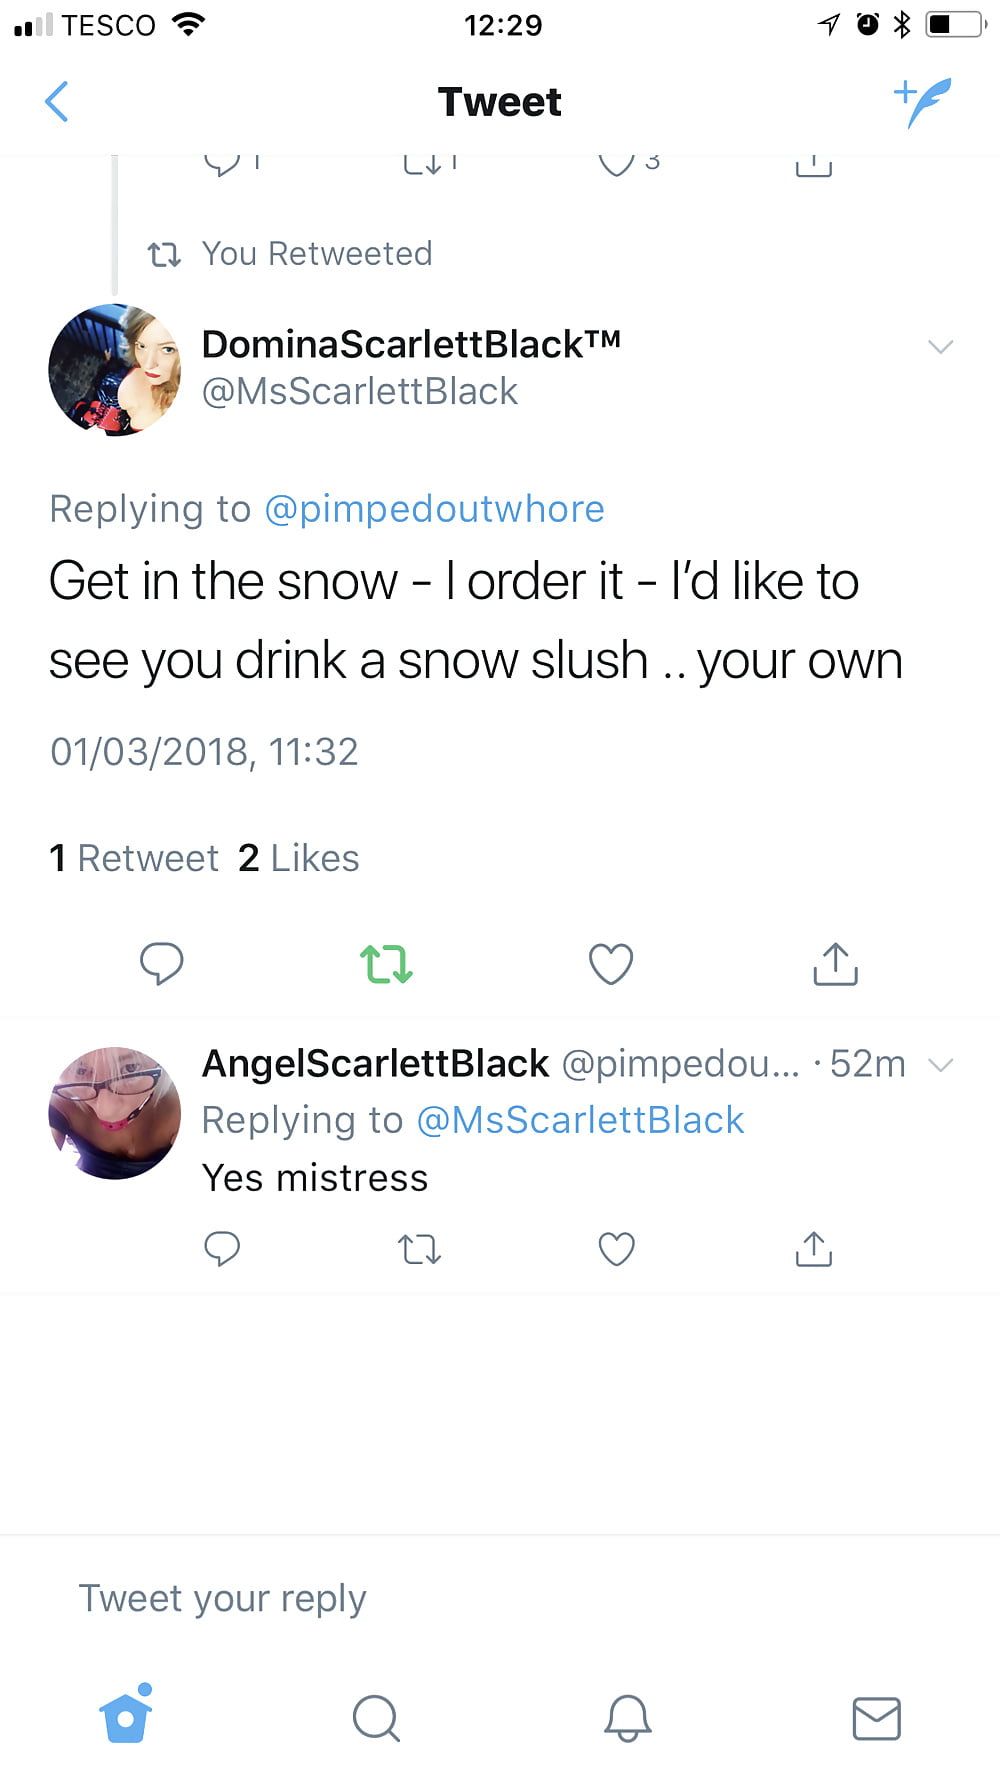 Mistress orders Angel 2 piss in the snow